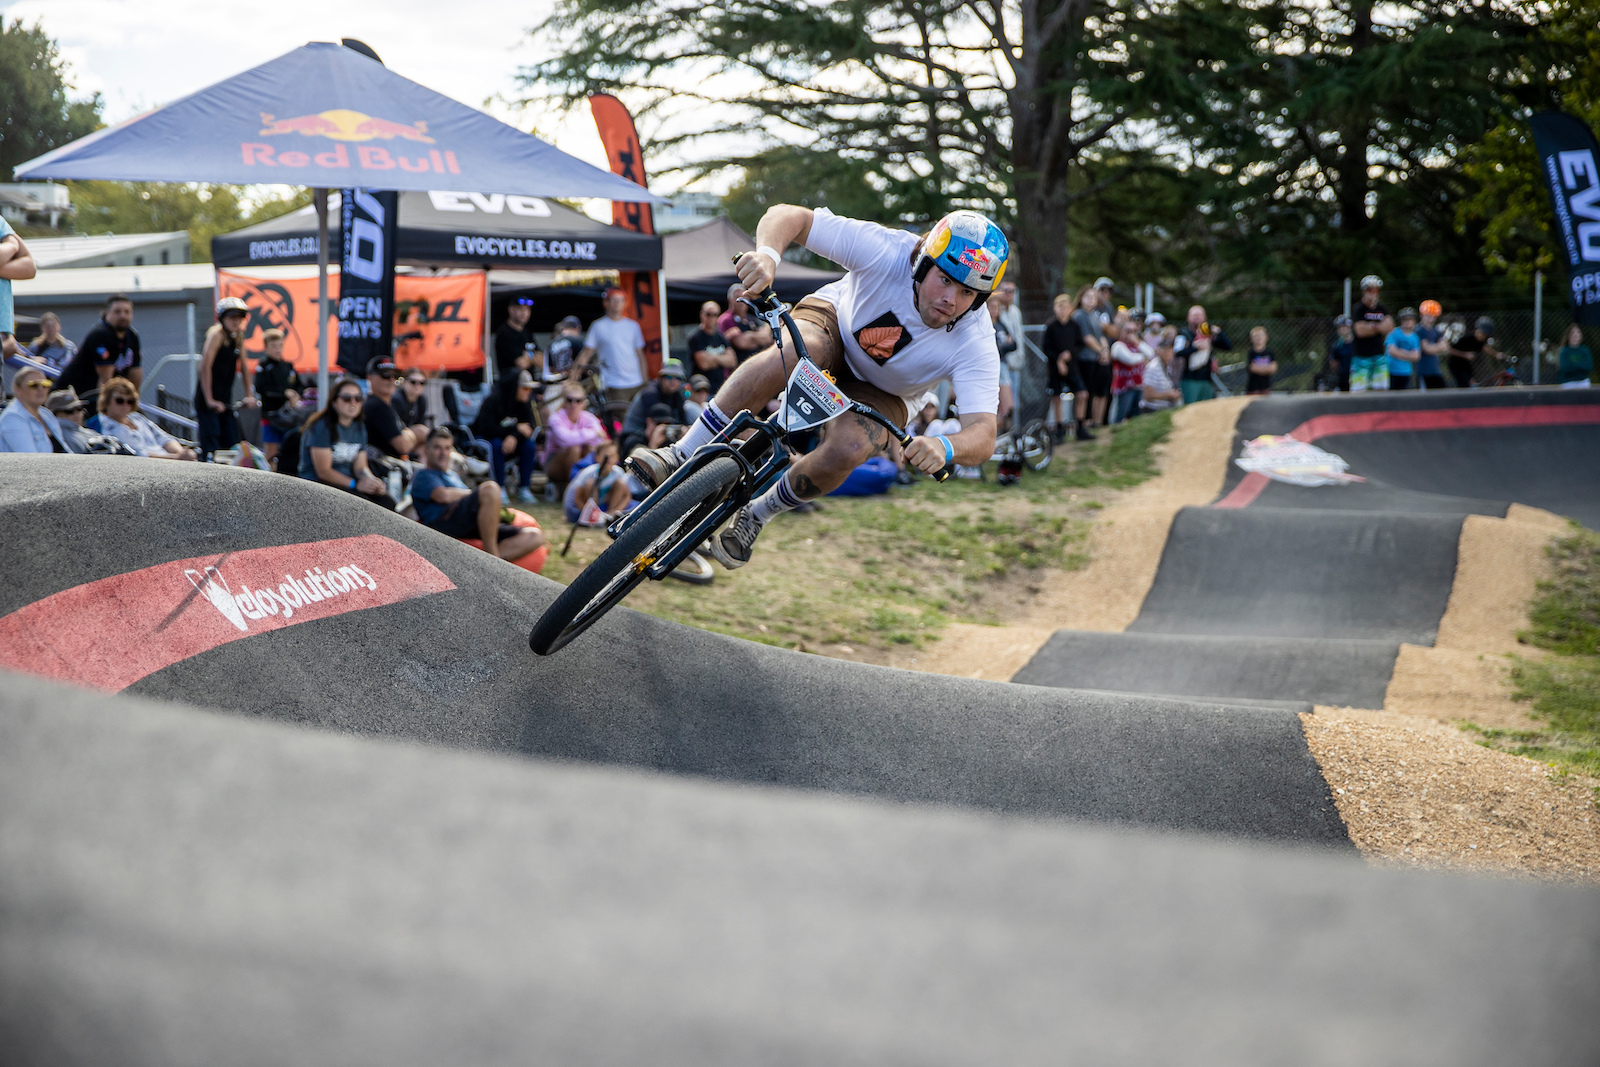 Remy Morton on track at the Red Bull UCI Pump Track World Championships Qualifier in Cambridge, New Zealand on March 20, 2021